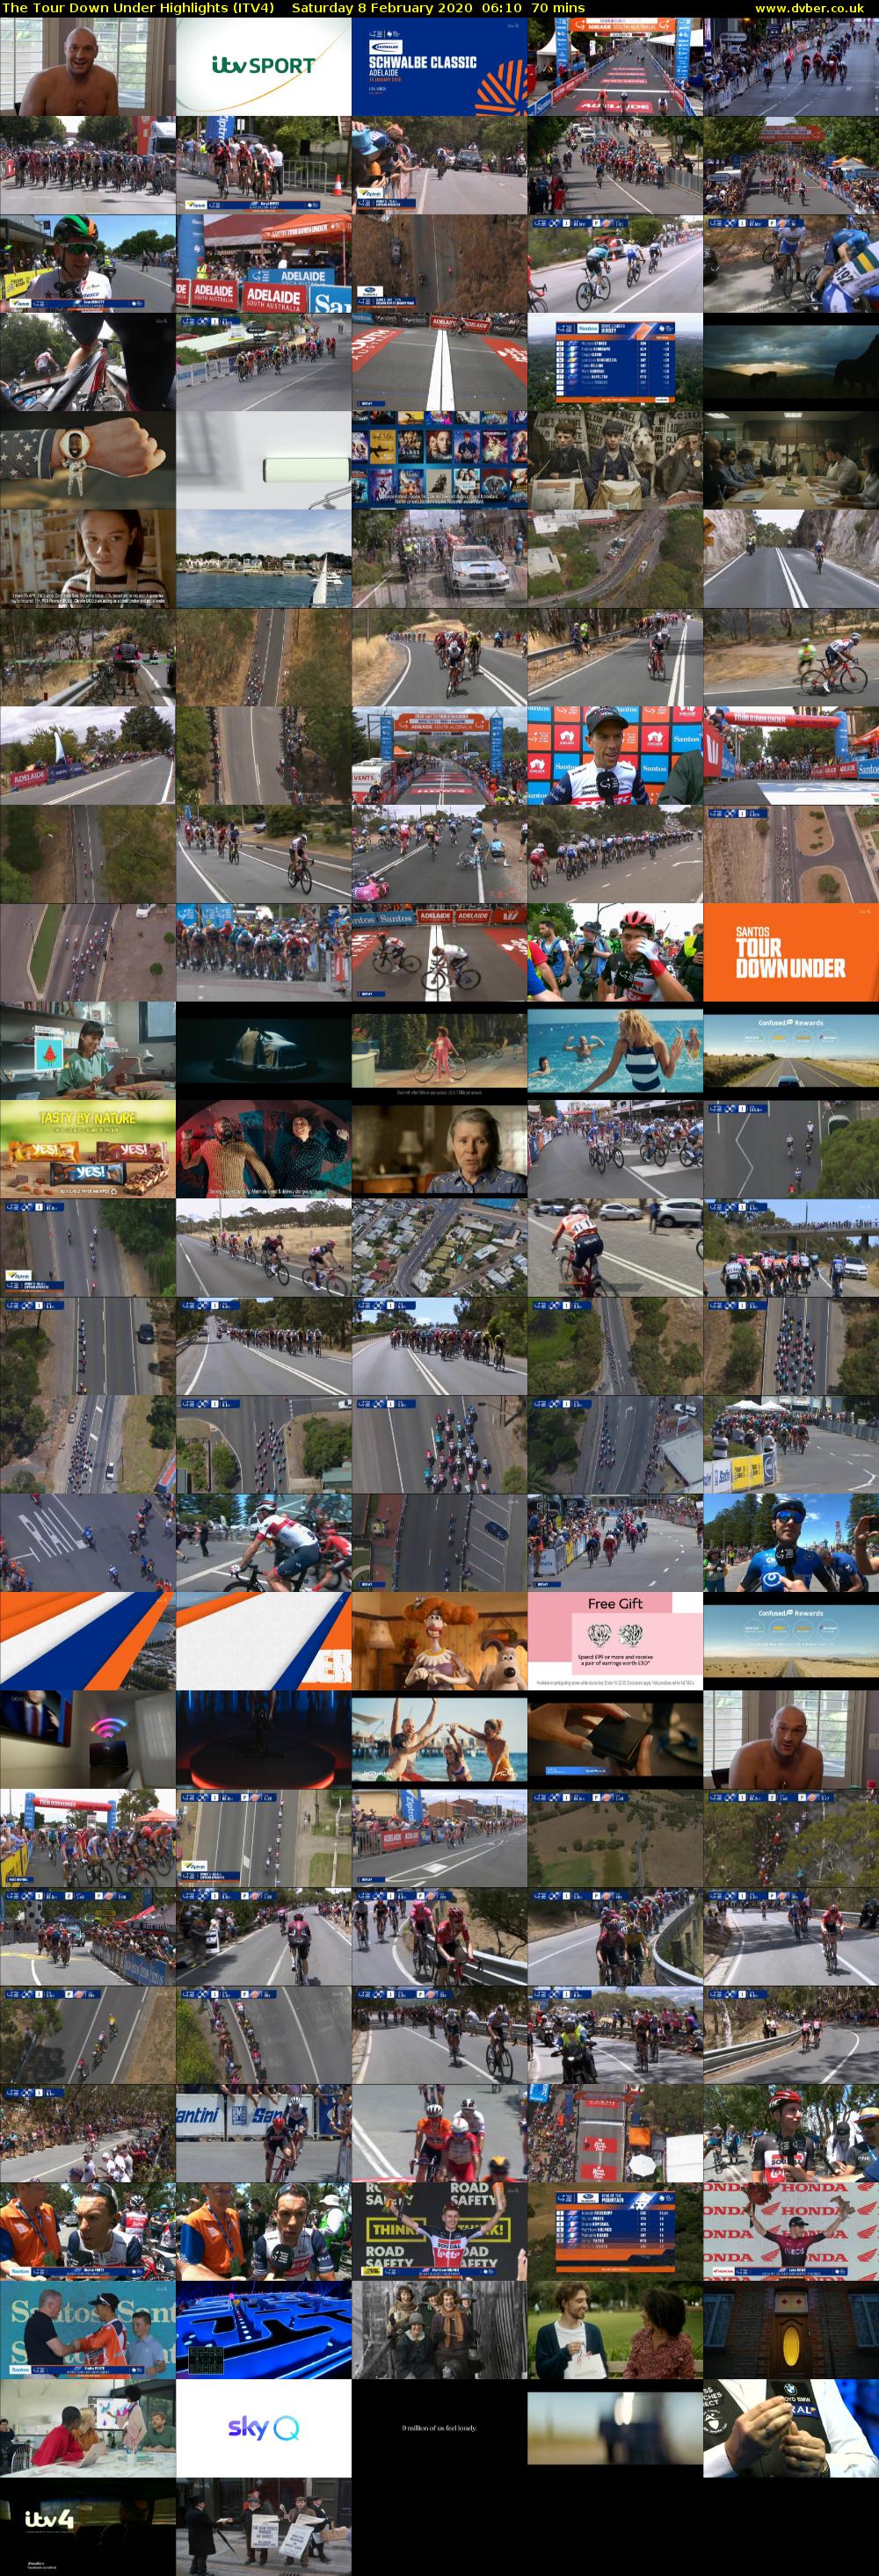 The Tour Down Under Highlights (ITV4) Saturday 8 February 2020 06:10 - 07:20